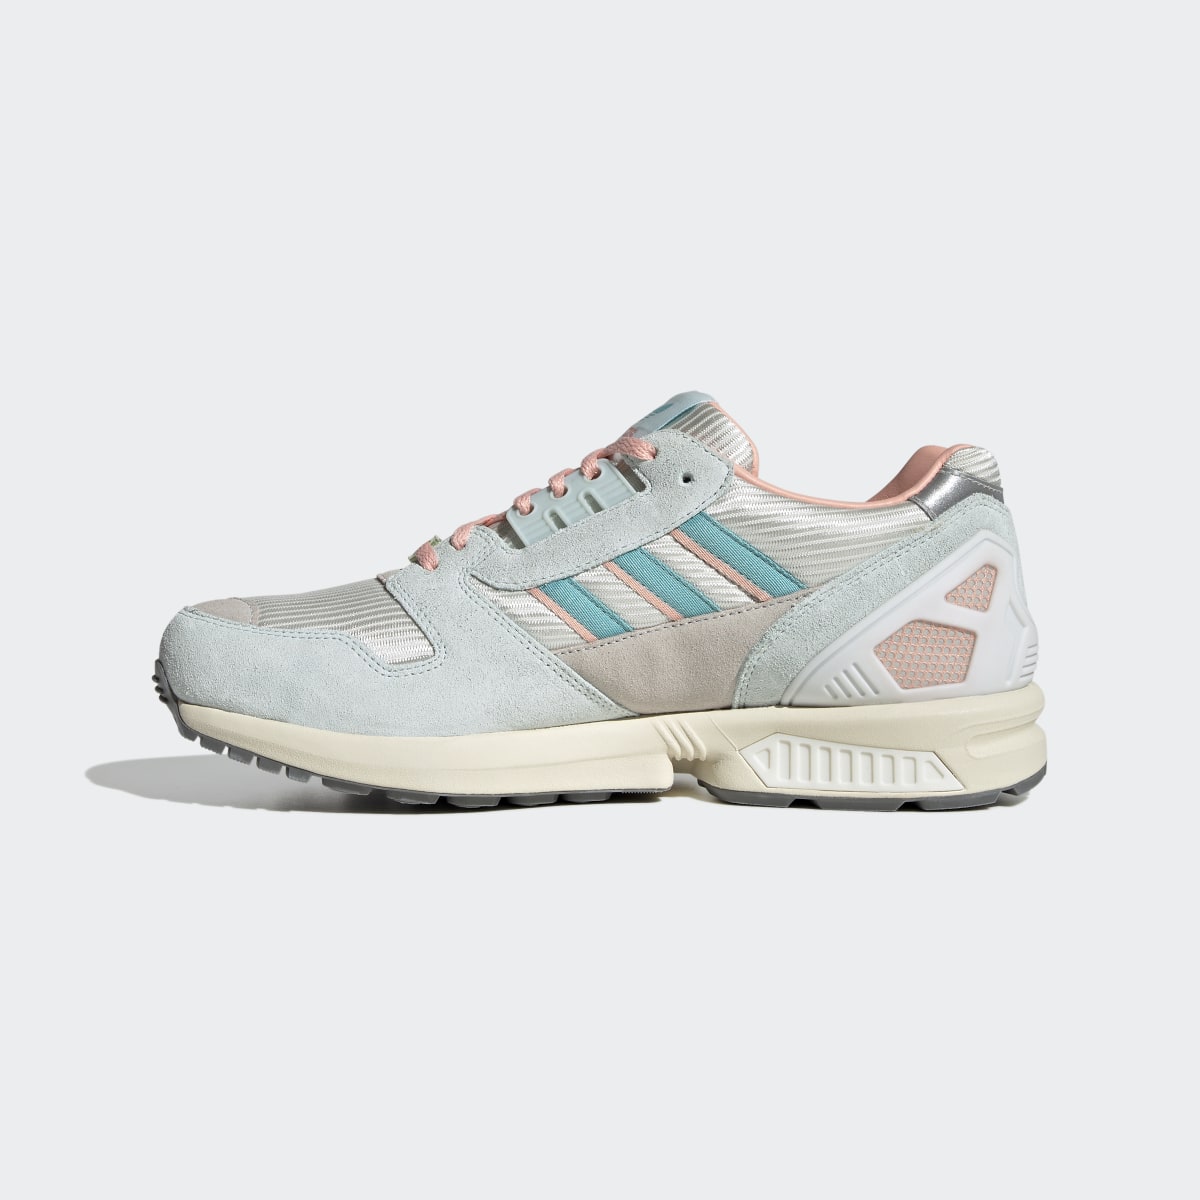 Adidas ZX 8000 Shoes. 7